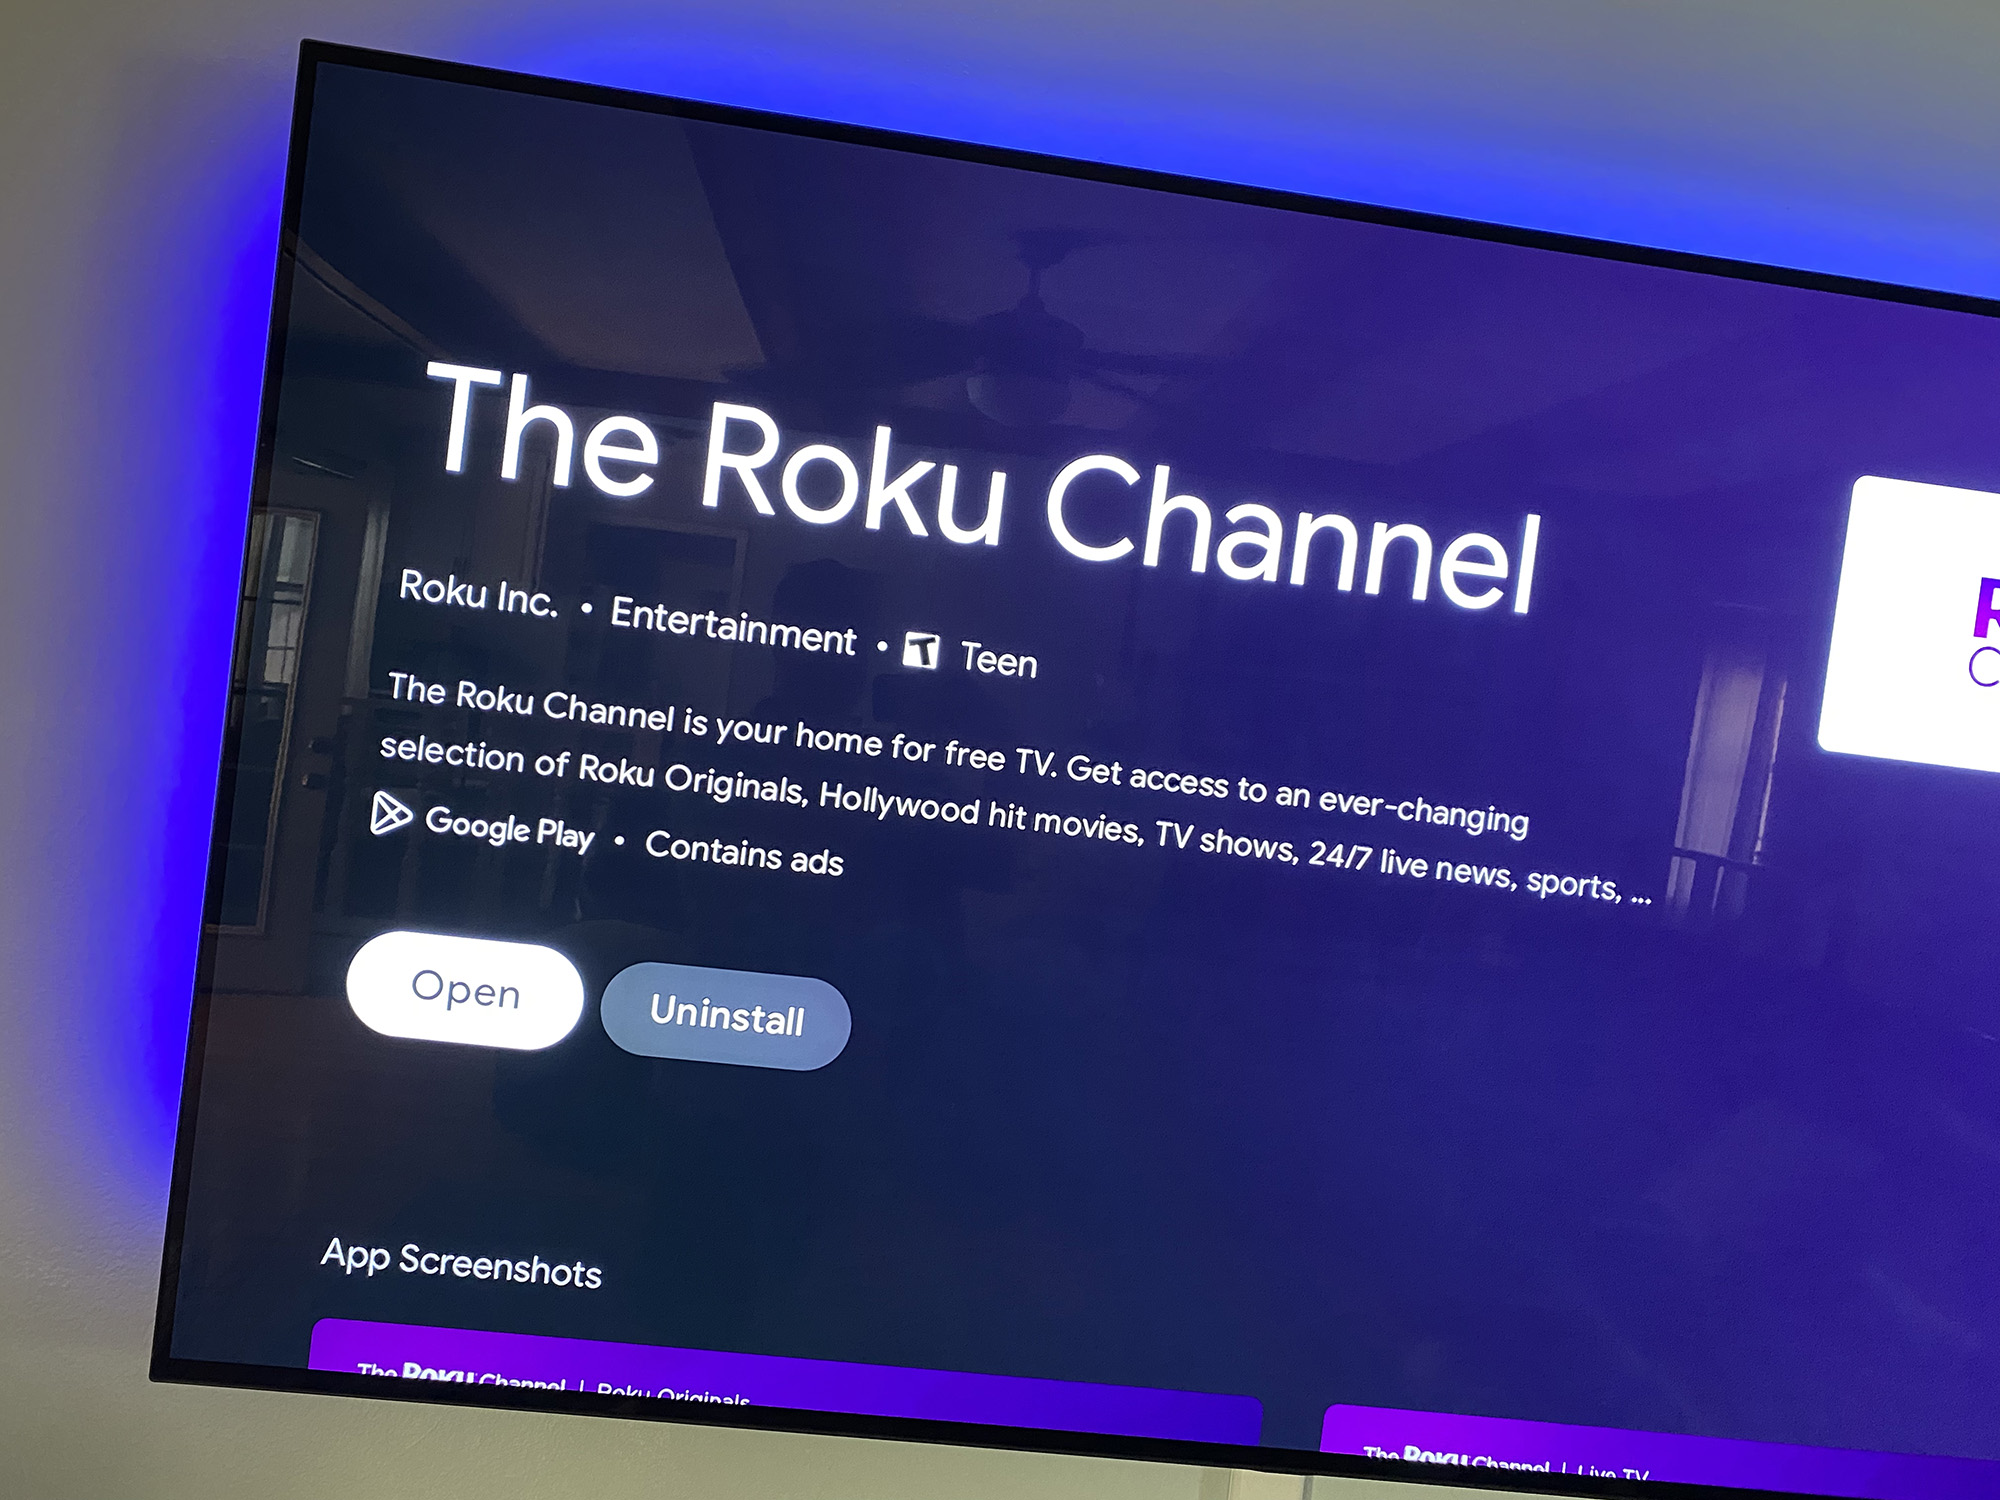 The Roku Channel is now available as a Google TV app, roku